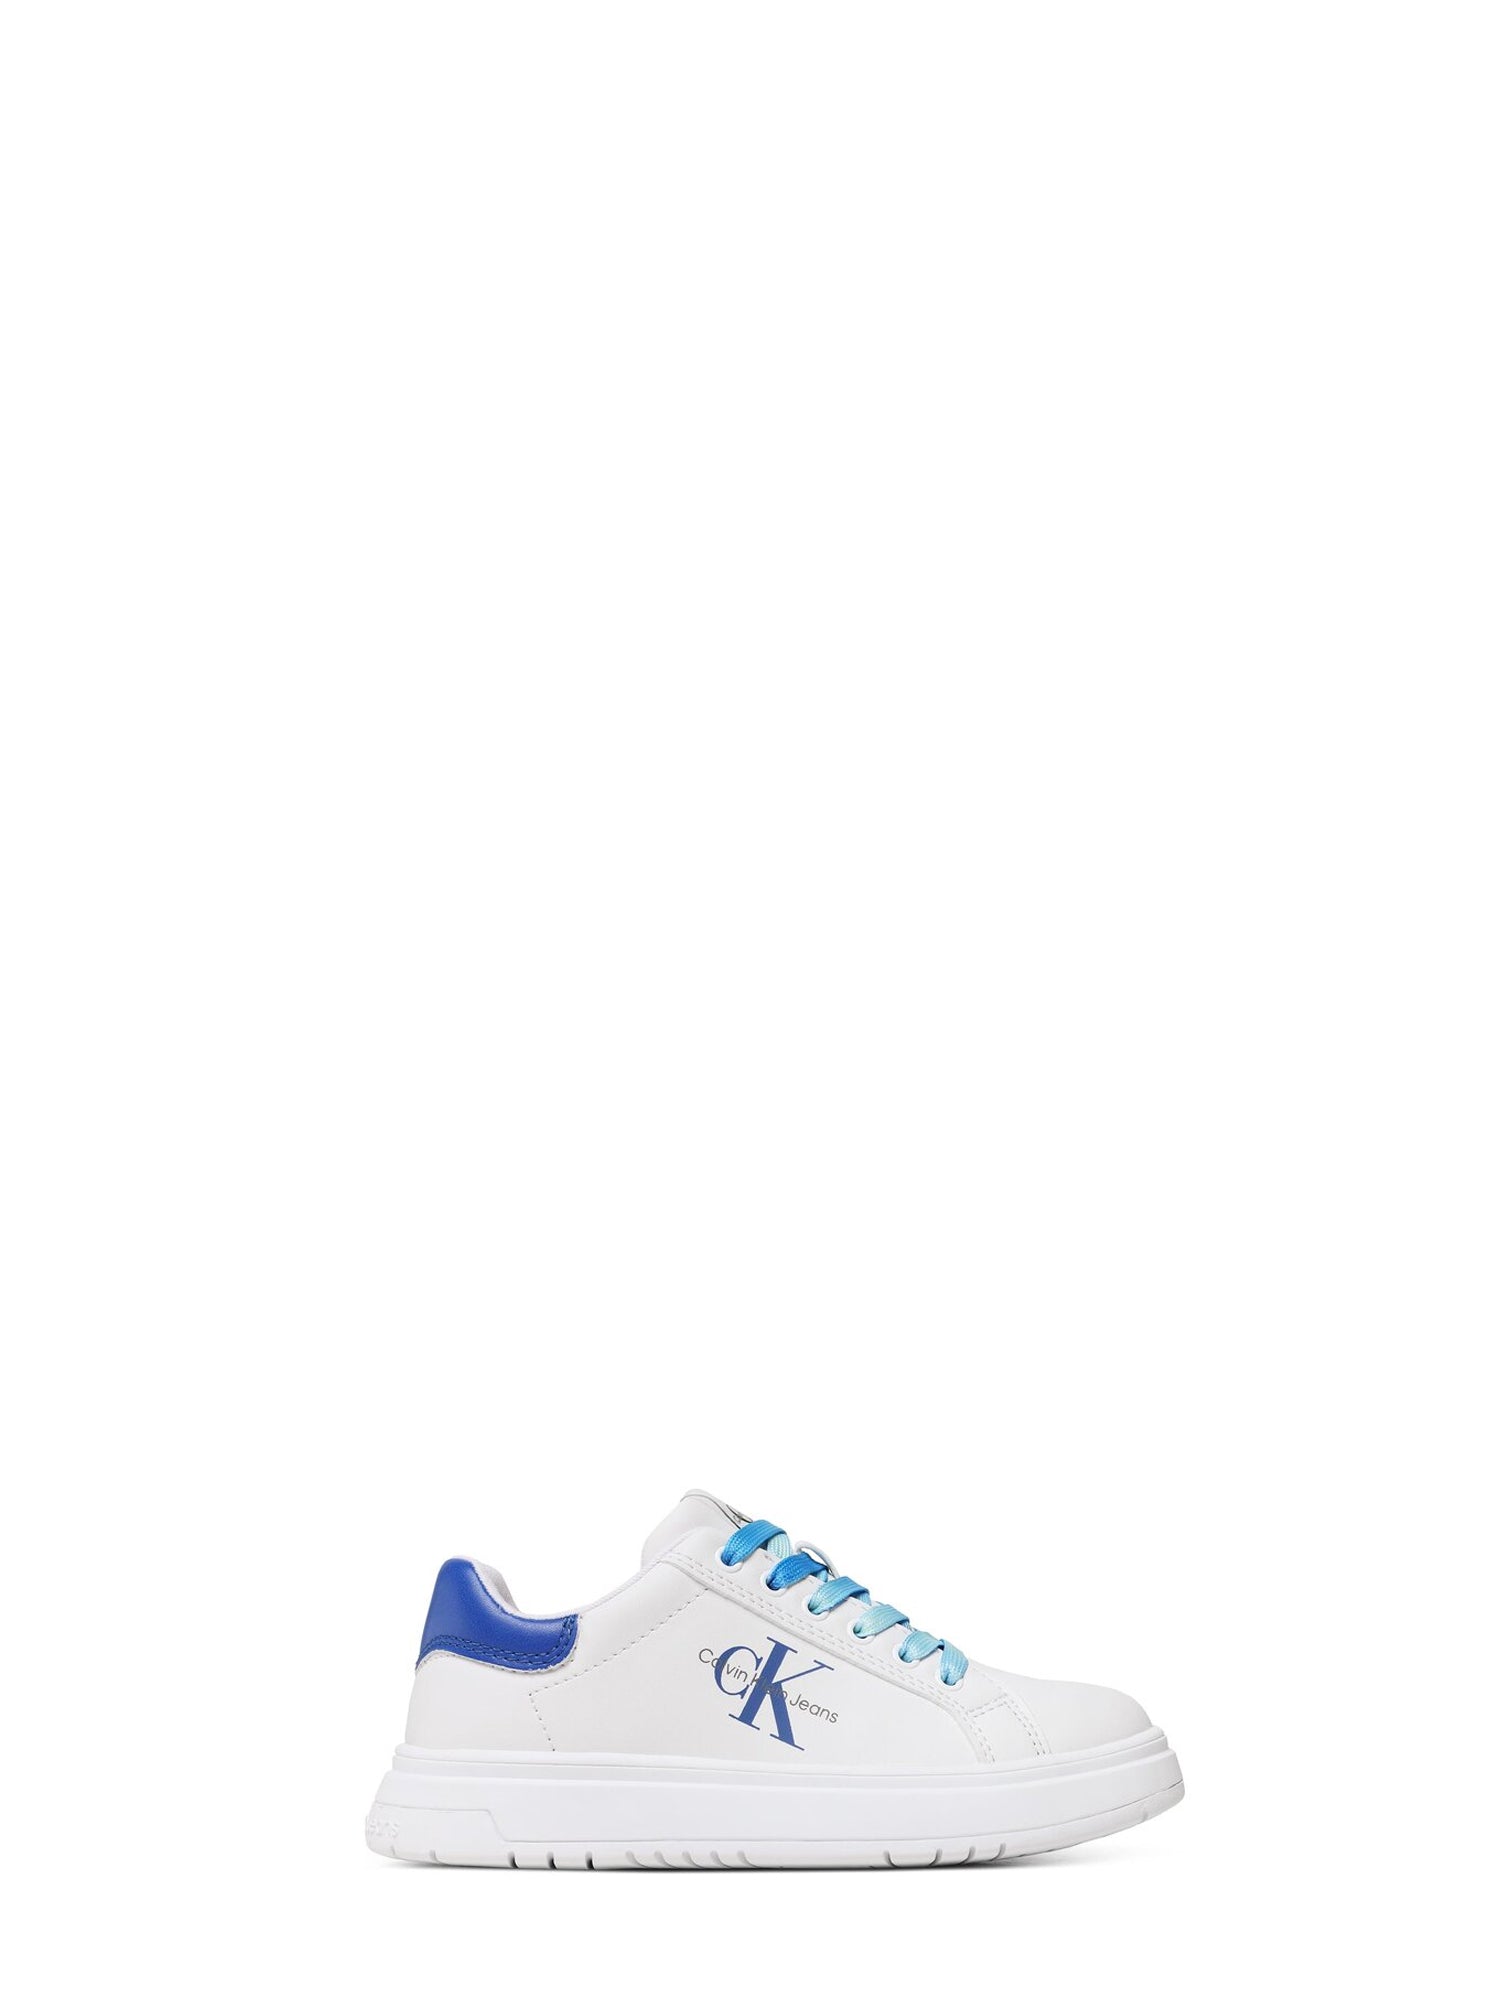 CALVIN KLEIN SHOES SNEAKERS BASSE LOW CUT LACE-UP BIANCO-BLU